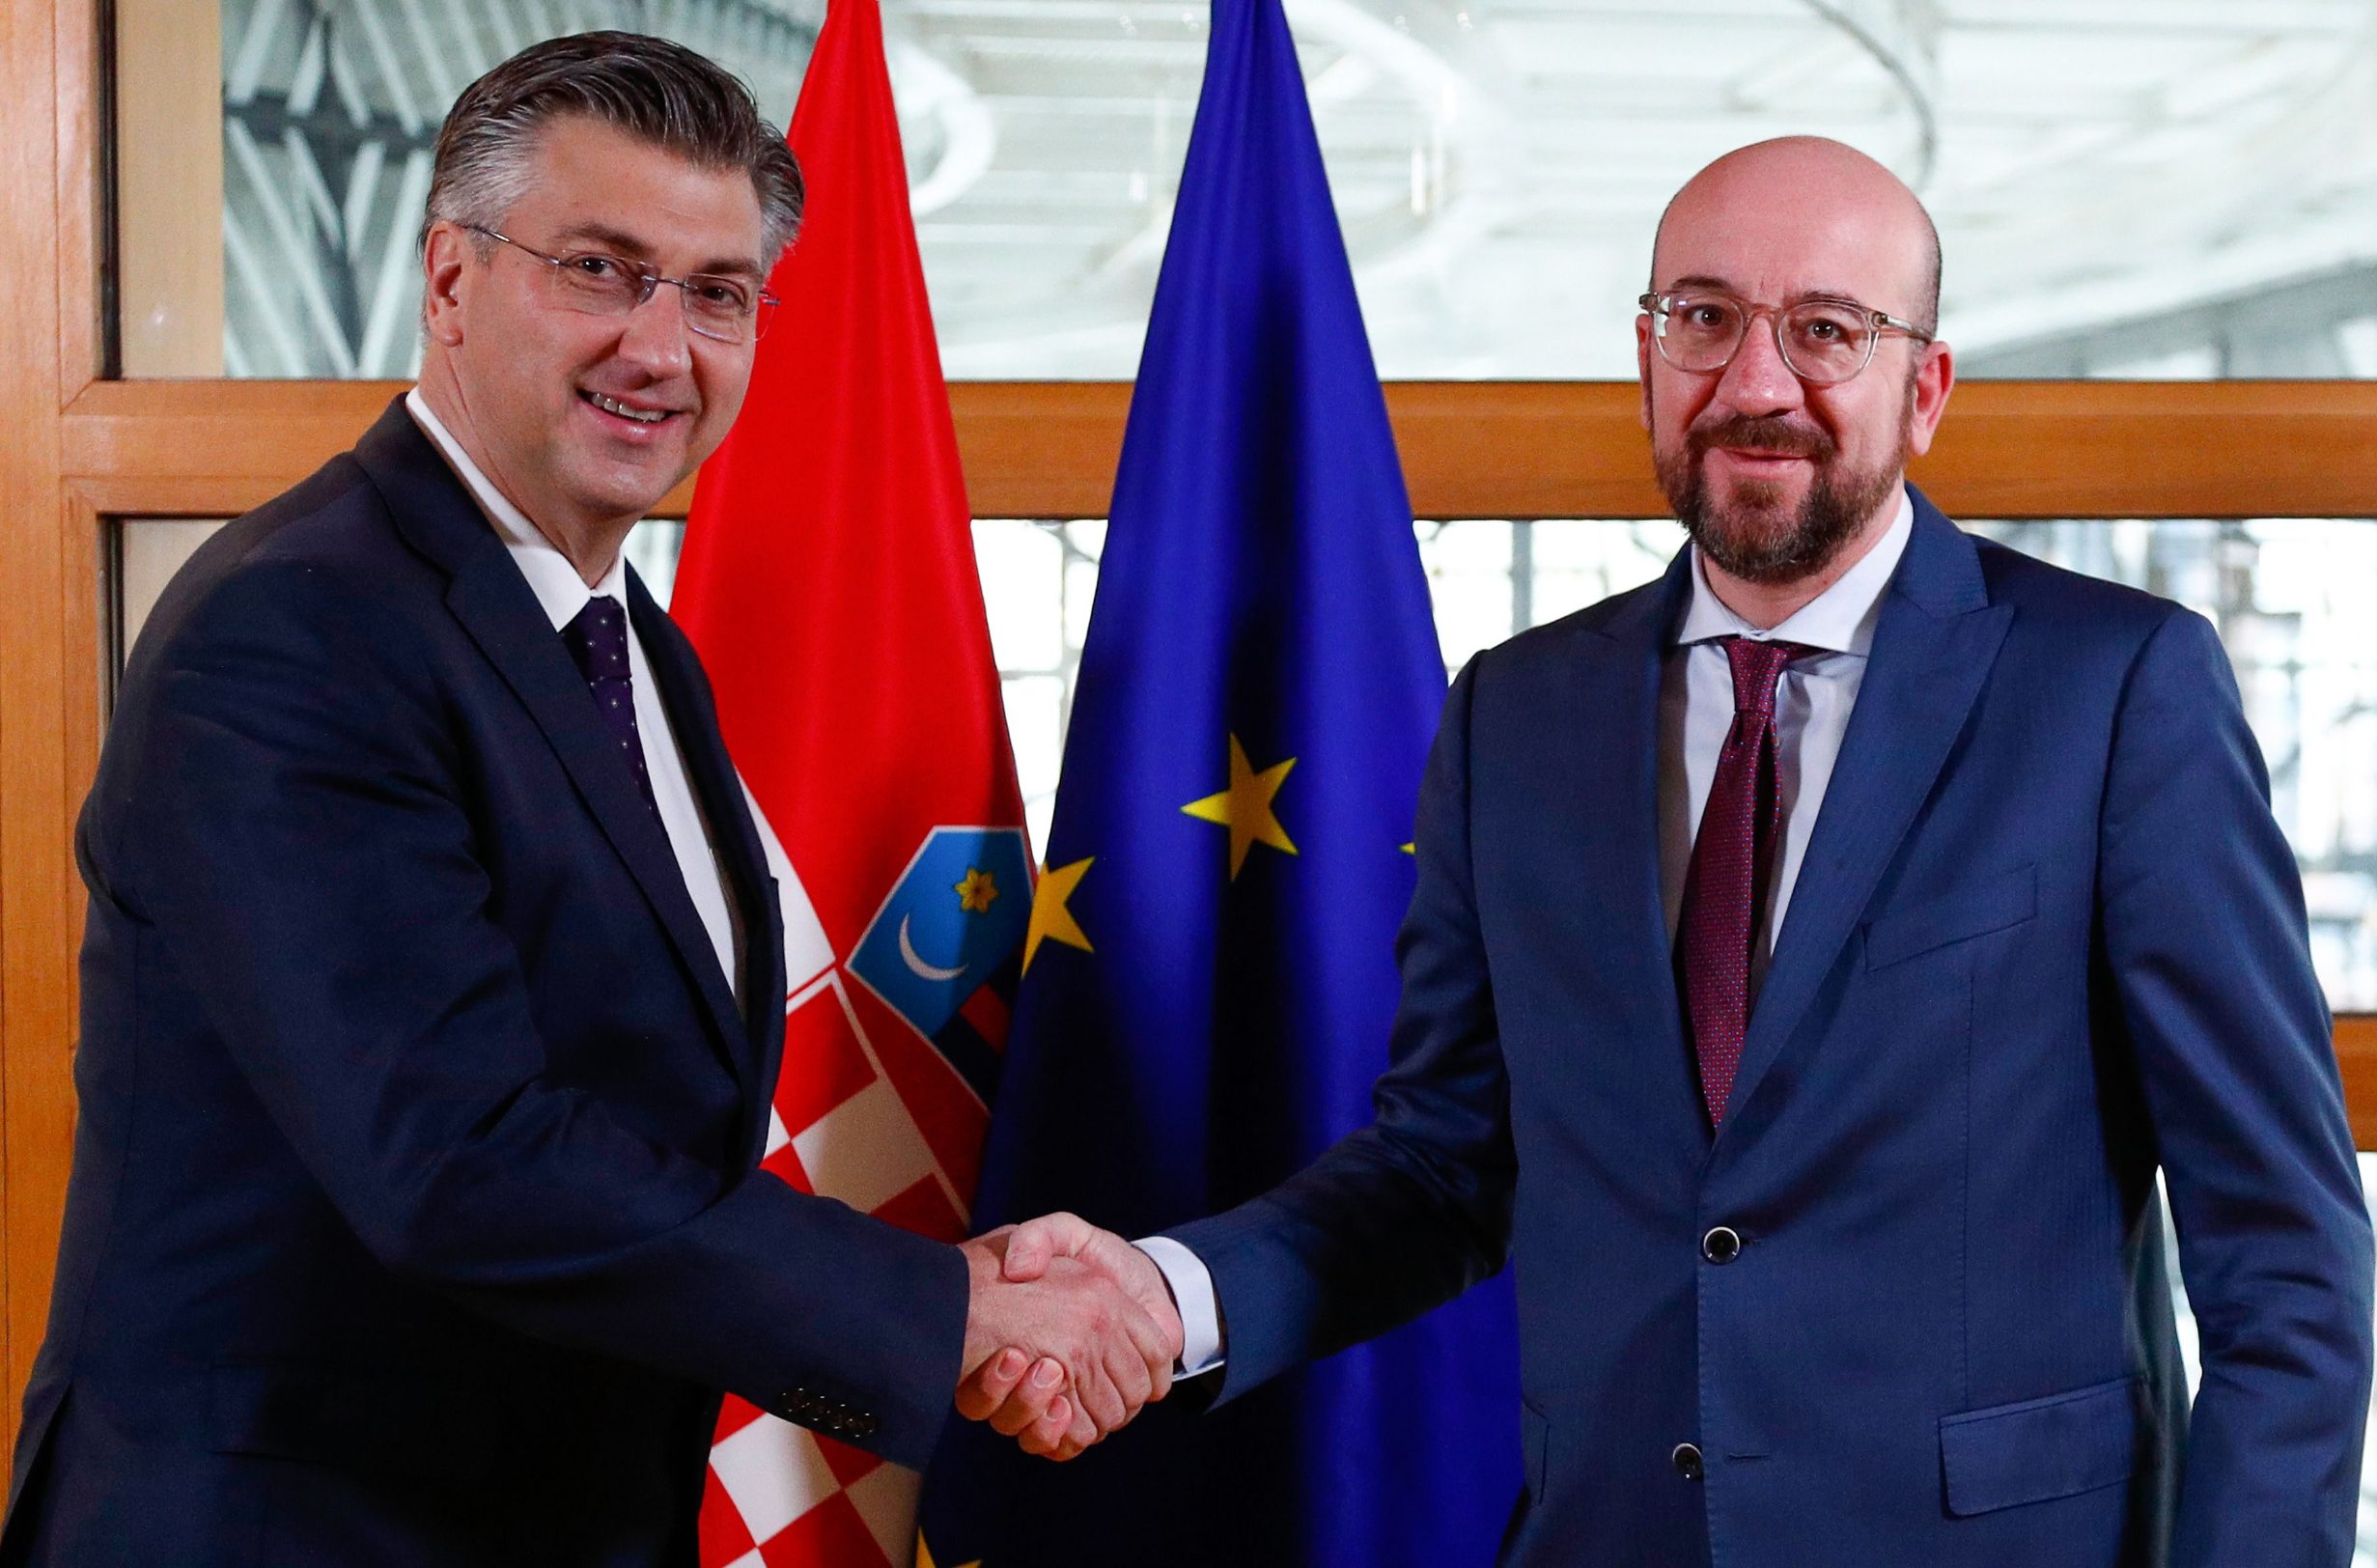 President of the European Council Charles Michel (R) welcomes Croatia's Prime Minister Andrej Plenkovic